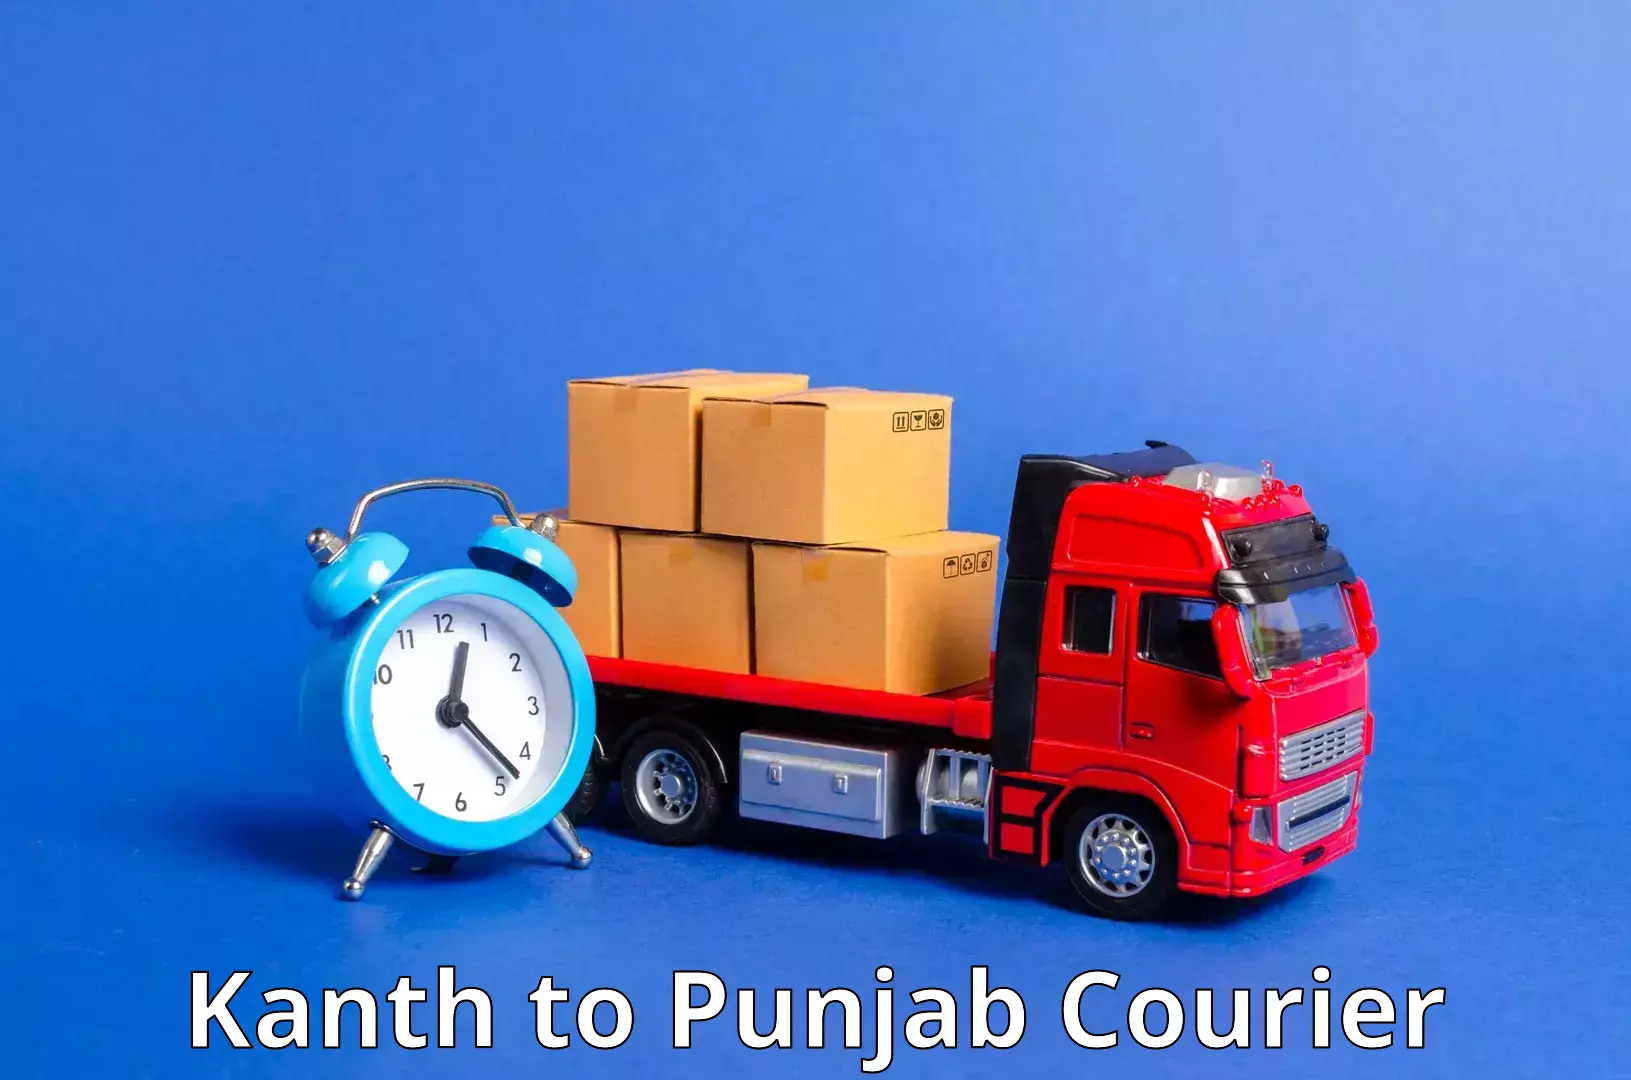 Advanced package delivery Kanth to Punjab